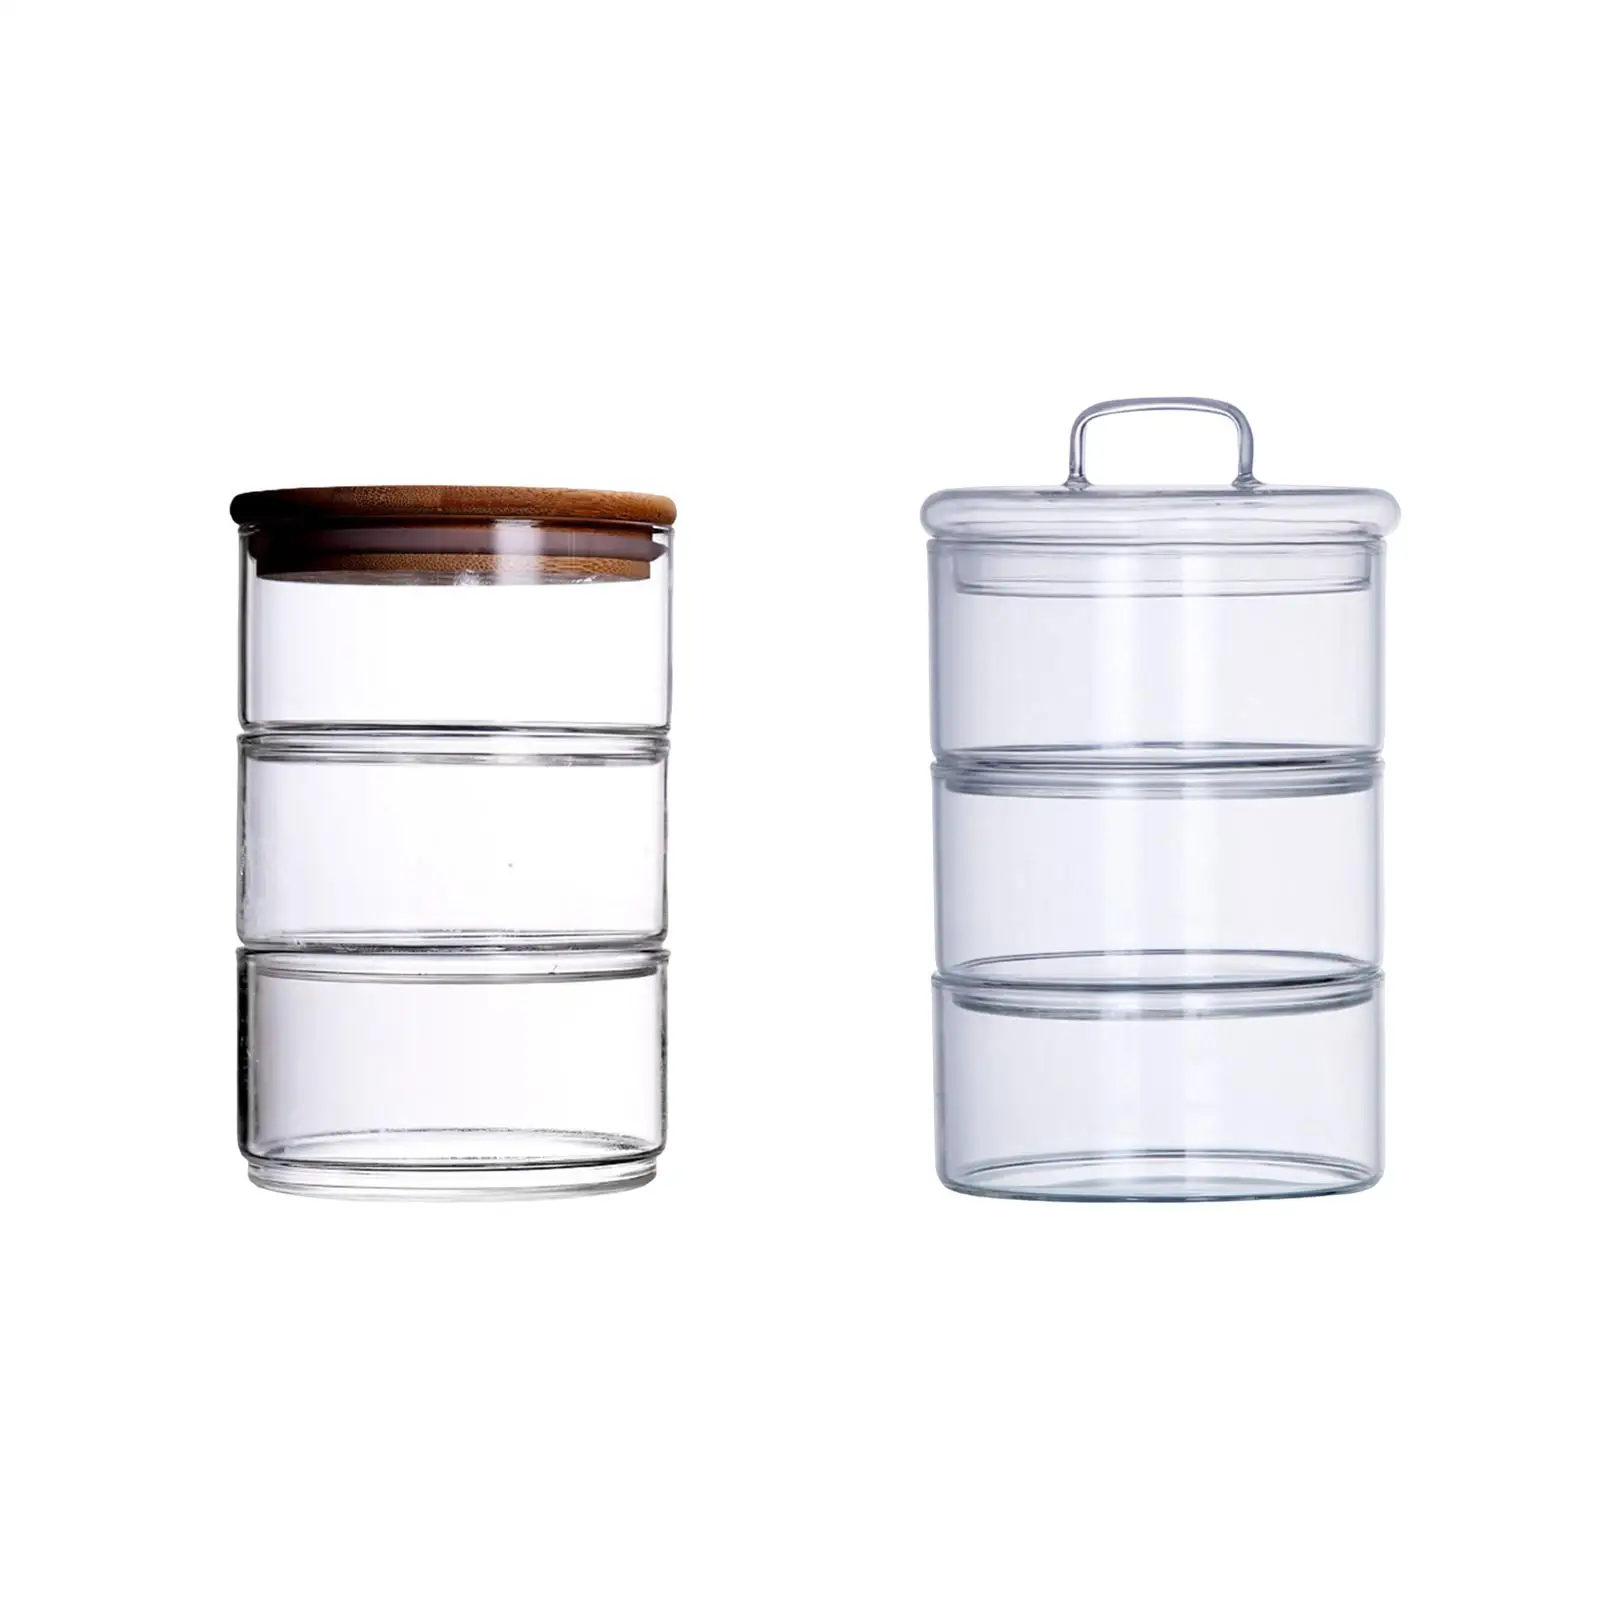 3 Tier Glass Stacking Apothecary Jar Grain Container Multipurpose Transparent Sealed 3 Tier Glass Food Jar for Pantry Cupboard